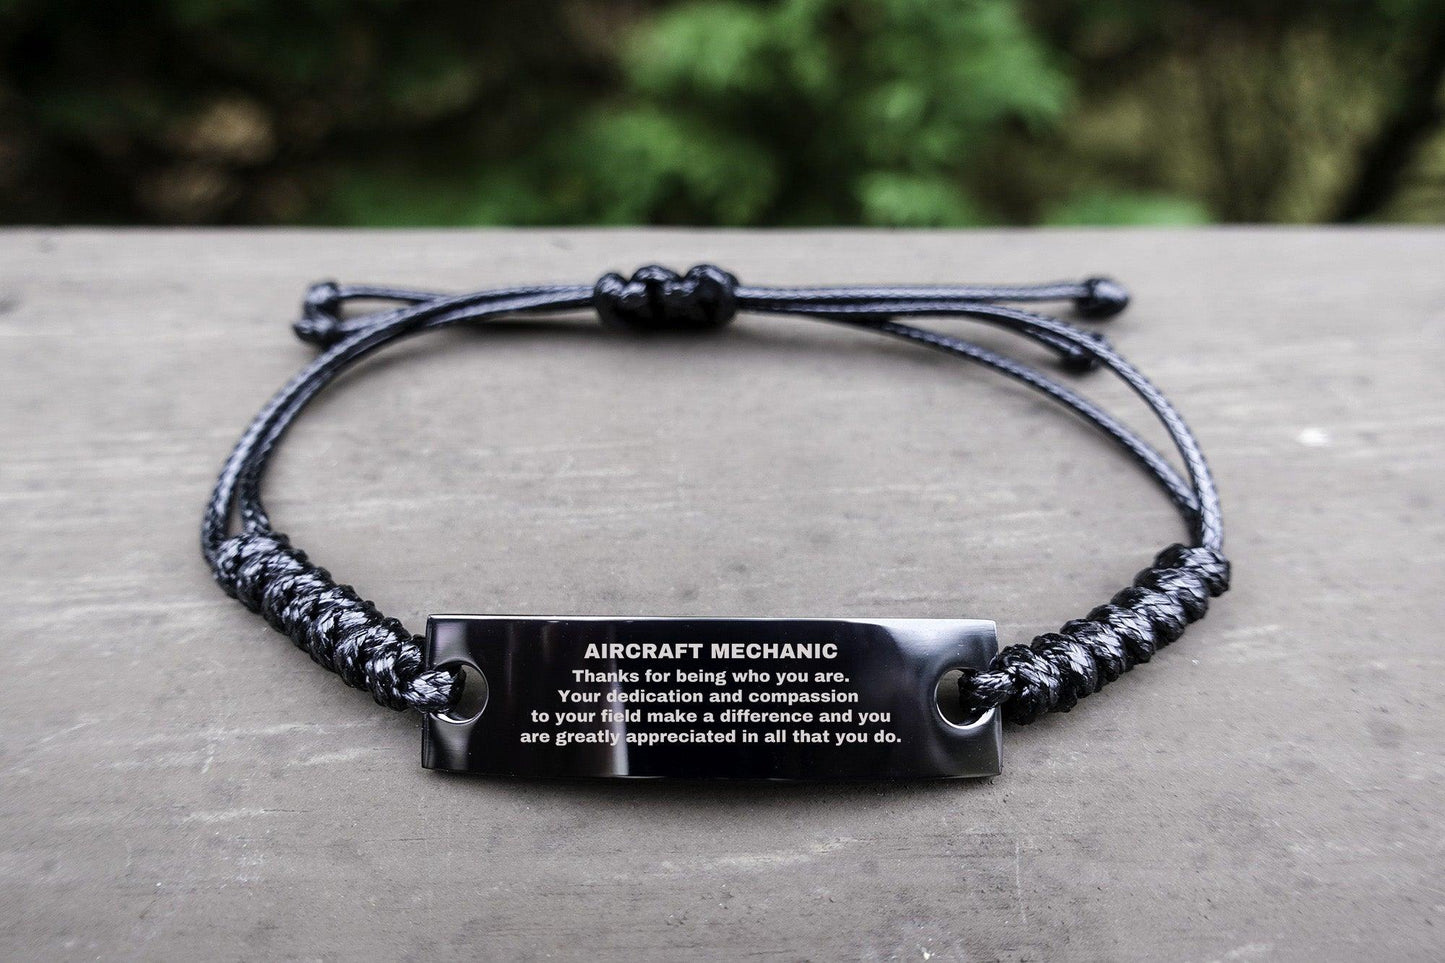 Aircraft Mechanic Black Braided Leather Rope Engraved Bracelet - Thanks for being who you are - Birthday Christmas Jewelry Gifts Coworkers Colleague Boss - Mallard Moon Gift Shop